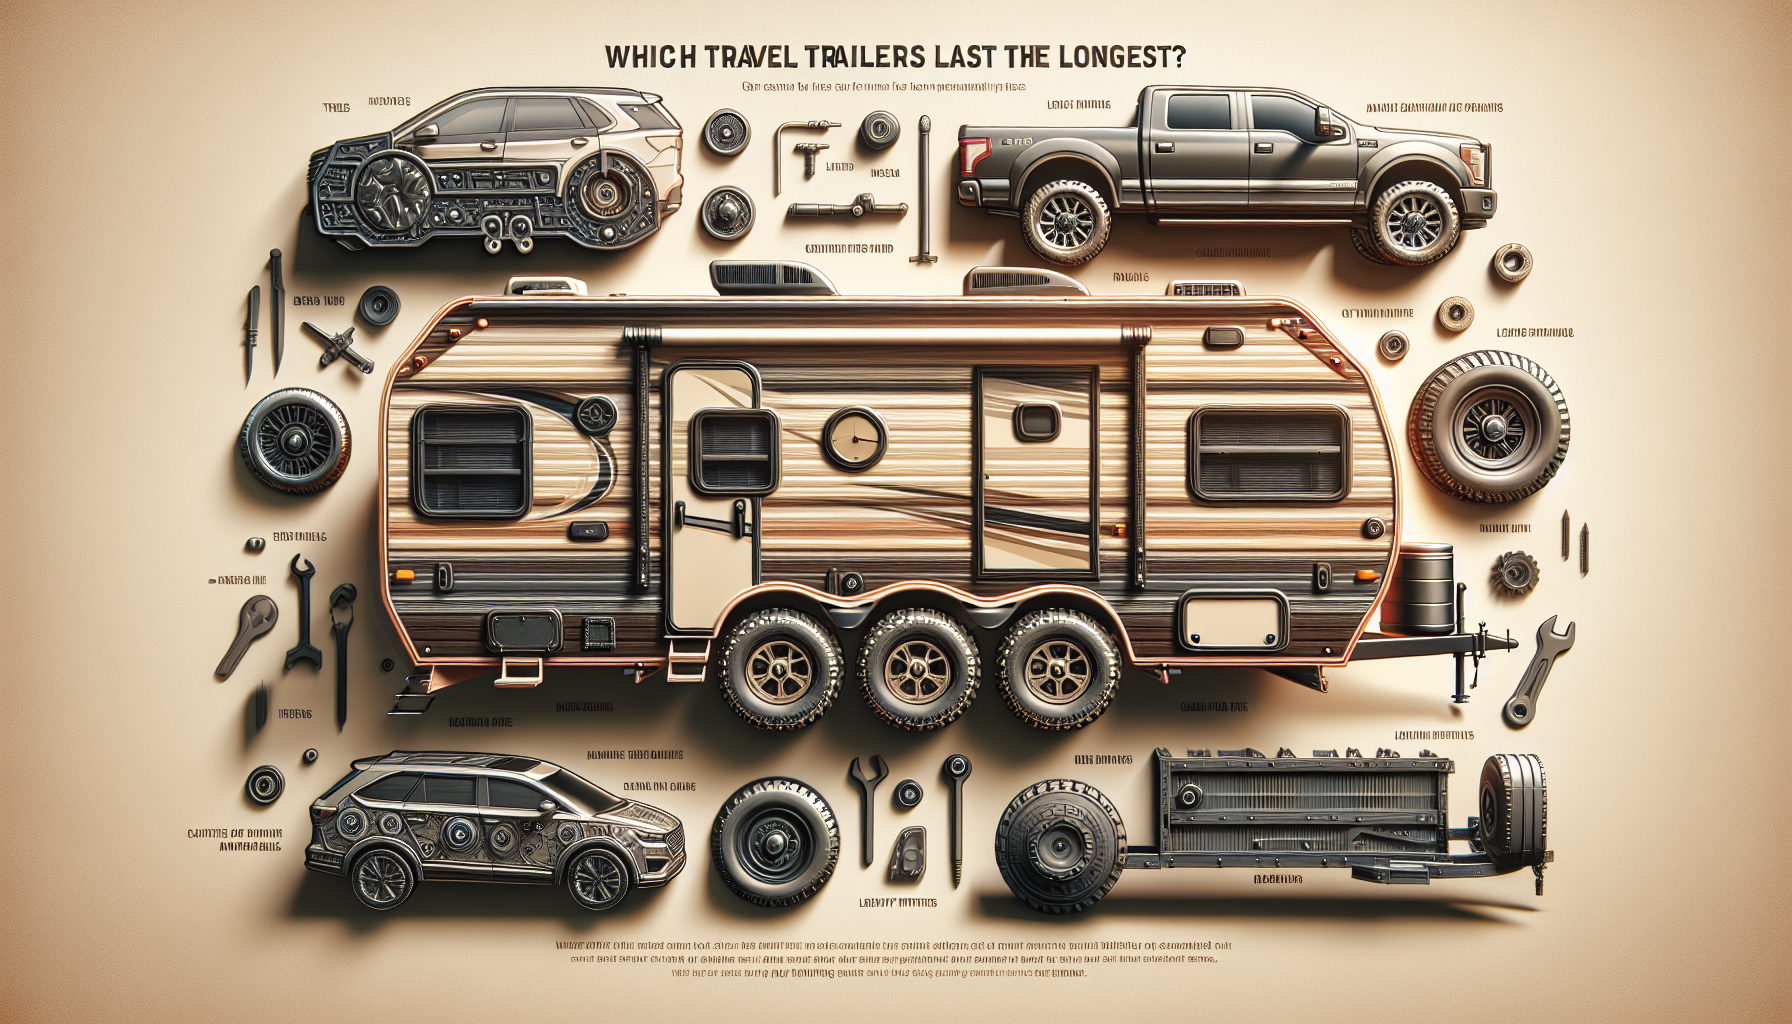 Which Travel Trailers Last The Longest?